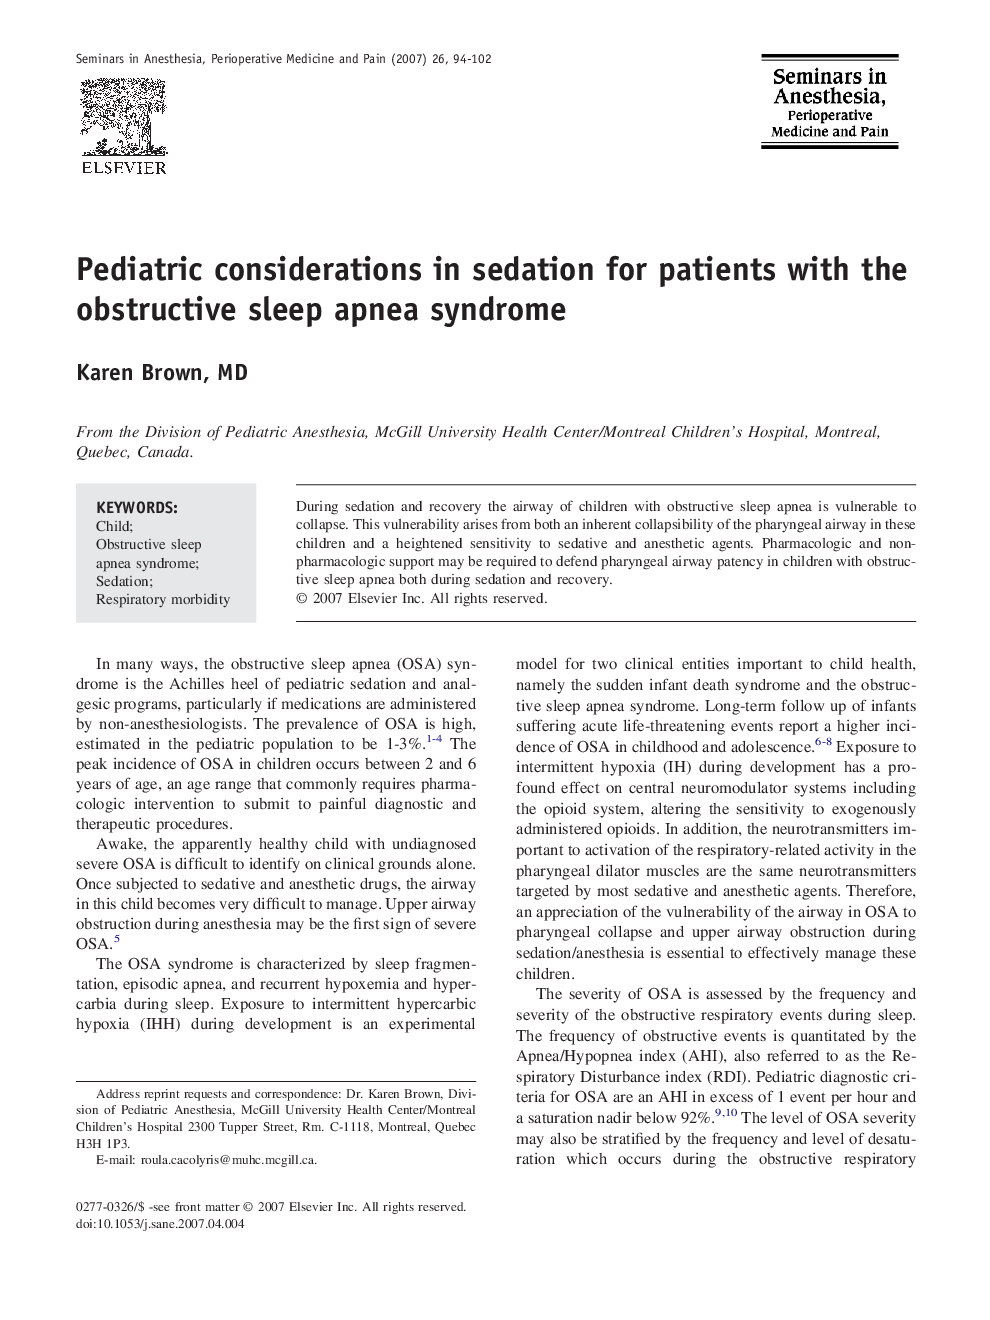 Pediatric considerations in sedation for patients with the obstructive sleep apnea syndrome